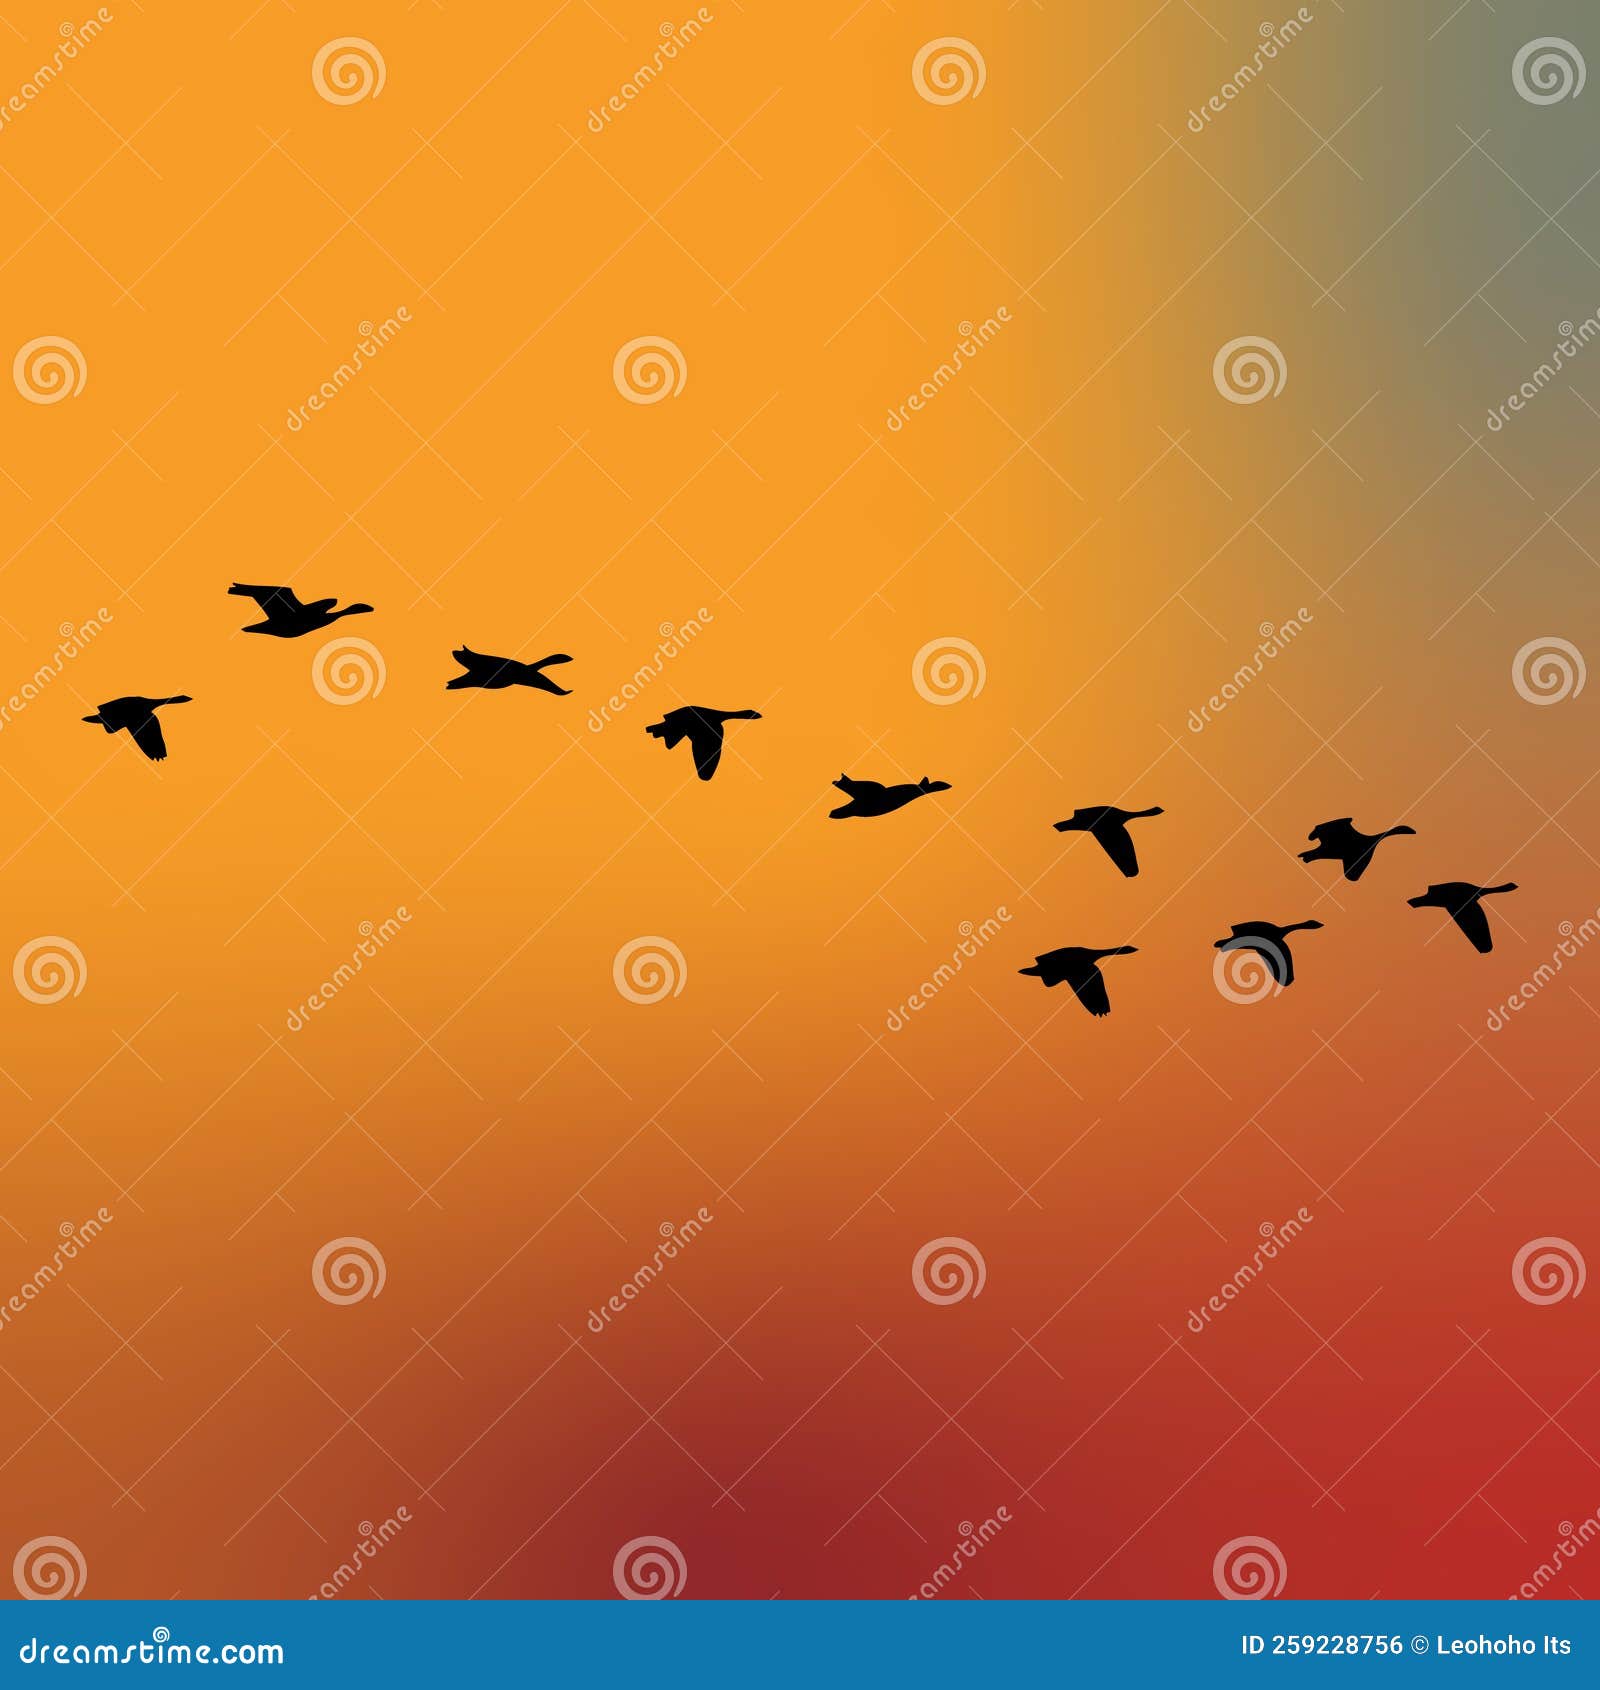 Silhouette Of A Flock Of Birds Or Geese Flying Vector Stock Vector